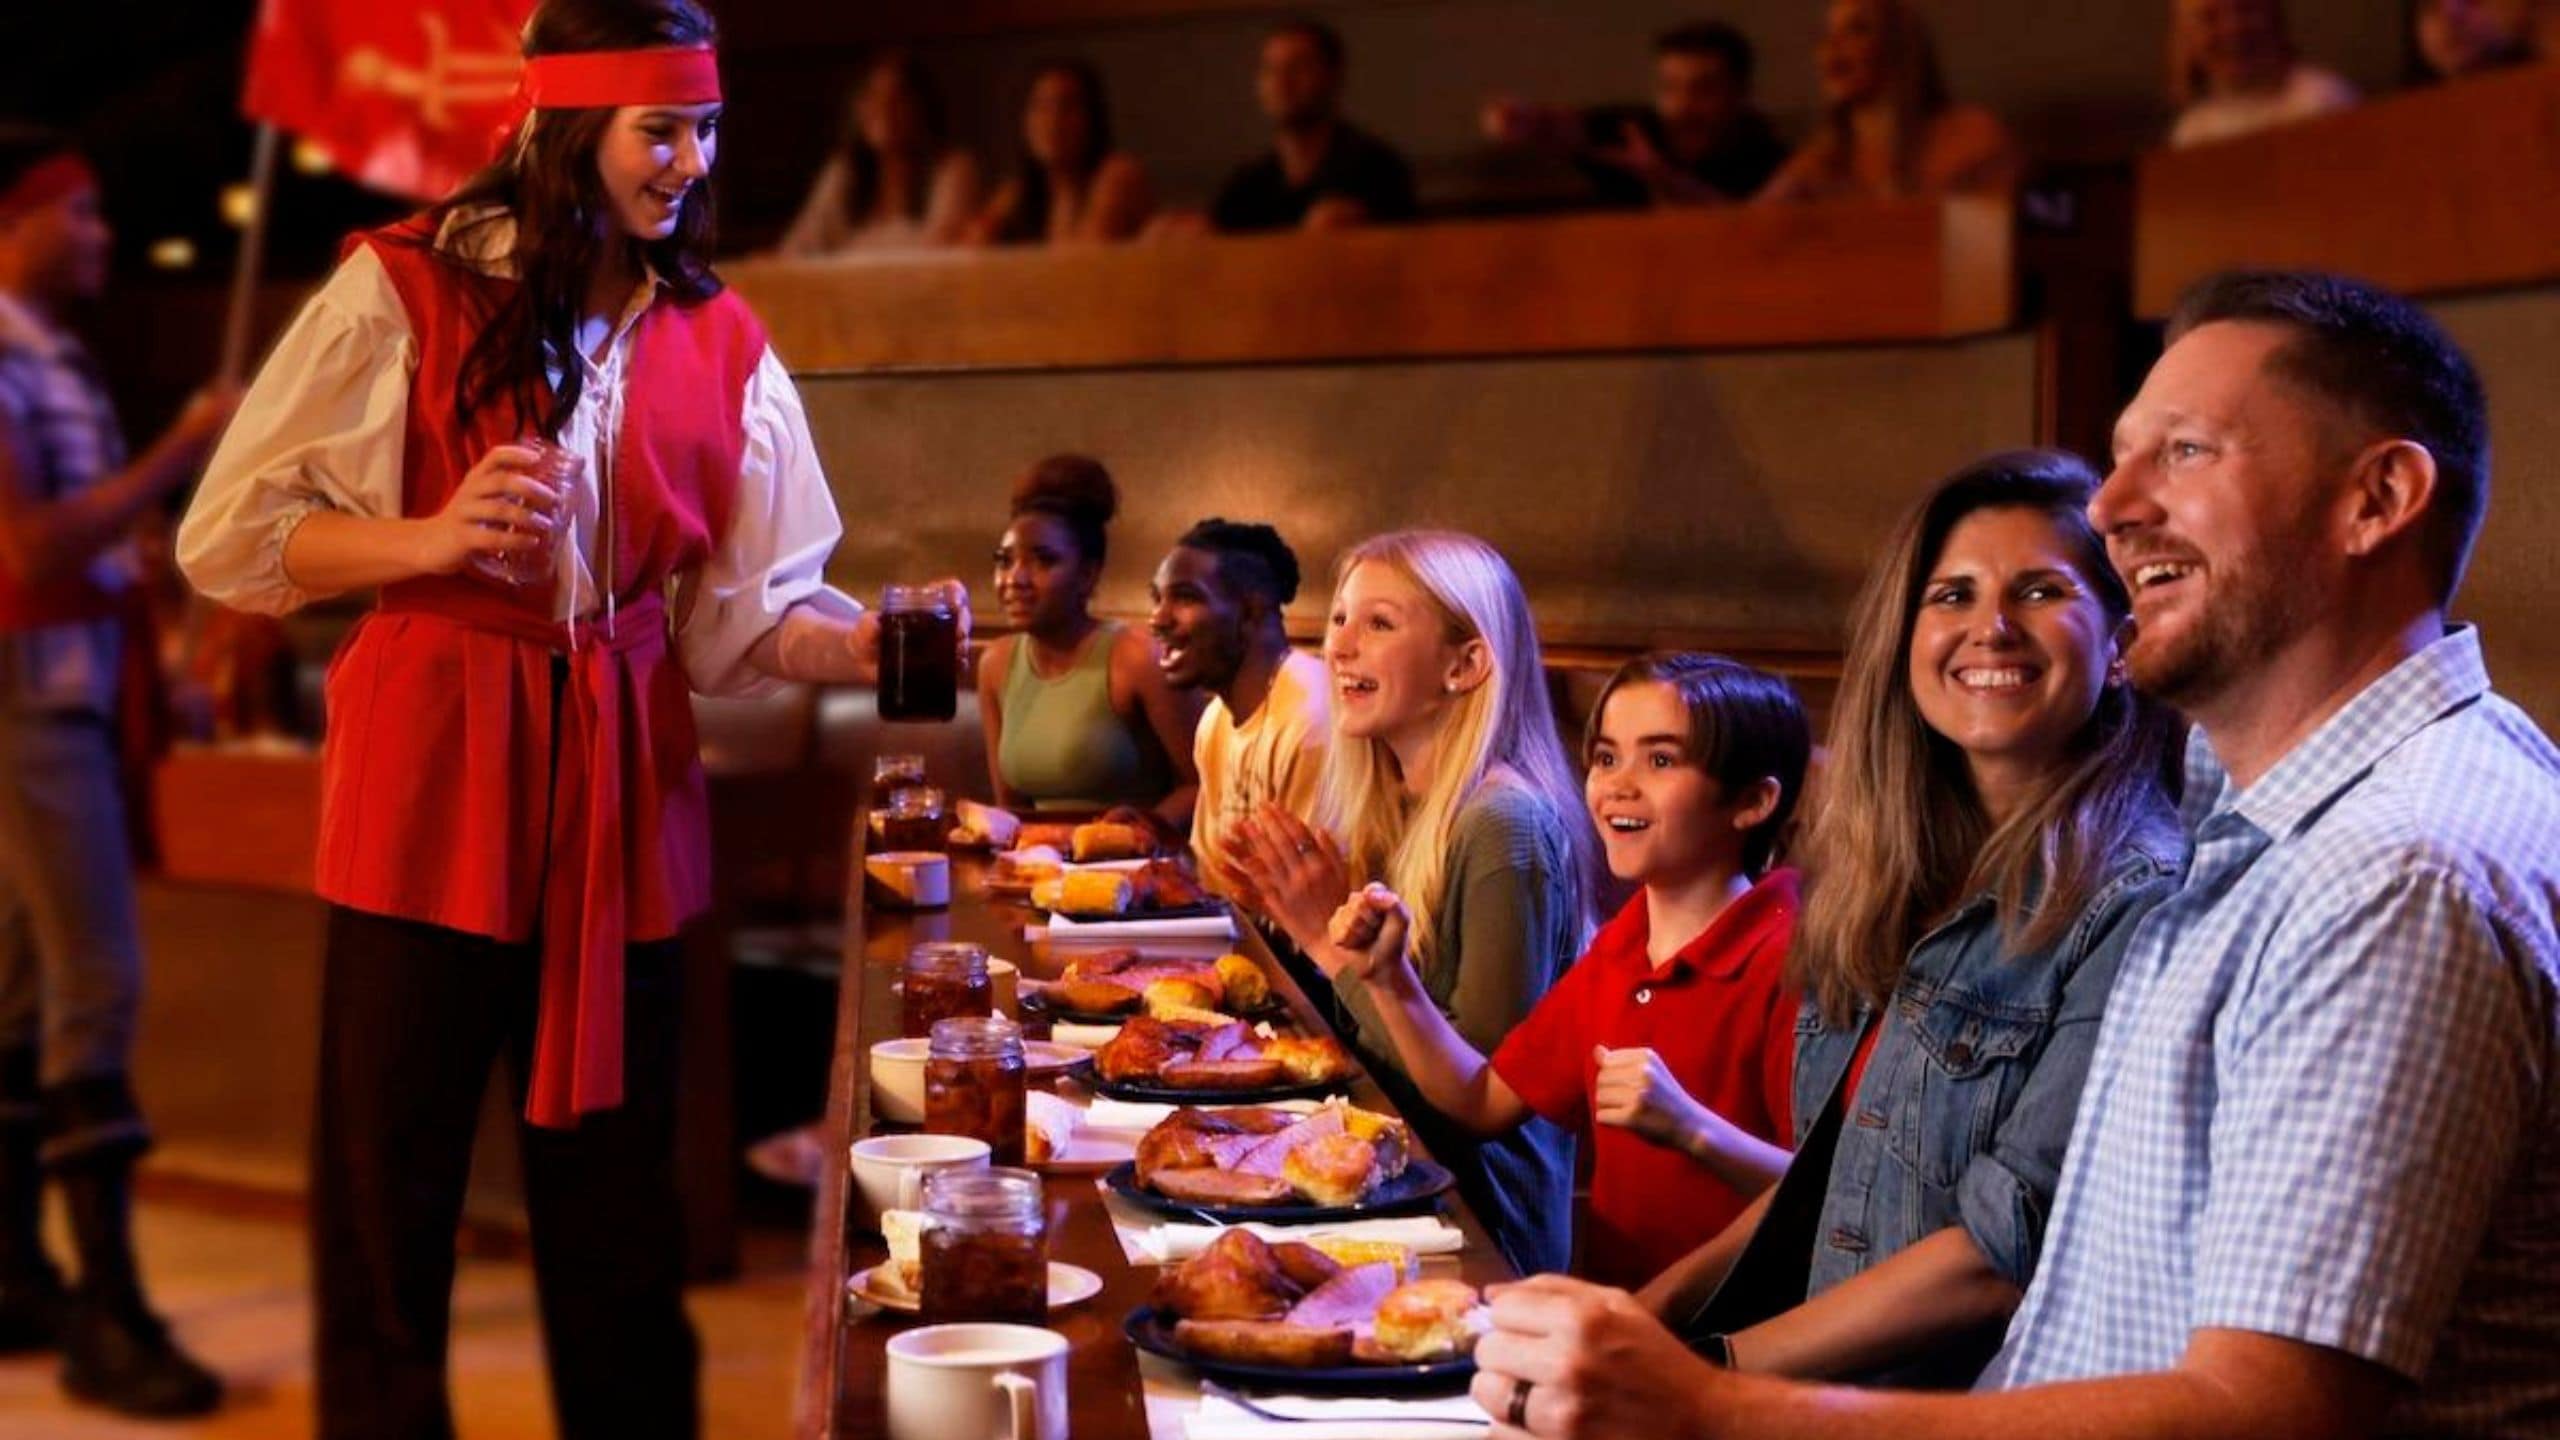 Pirates Voyage Dinner and Show 